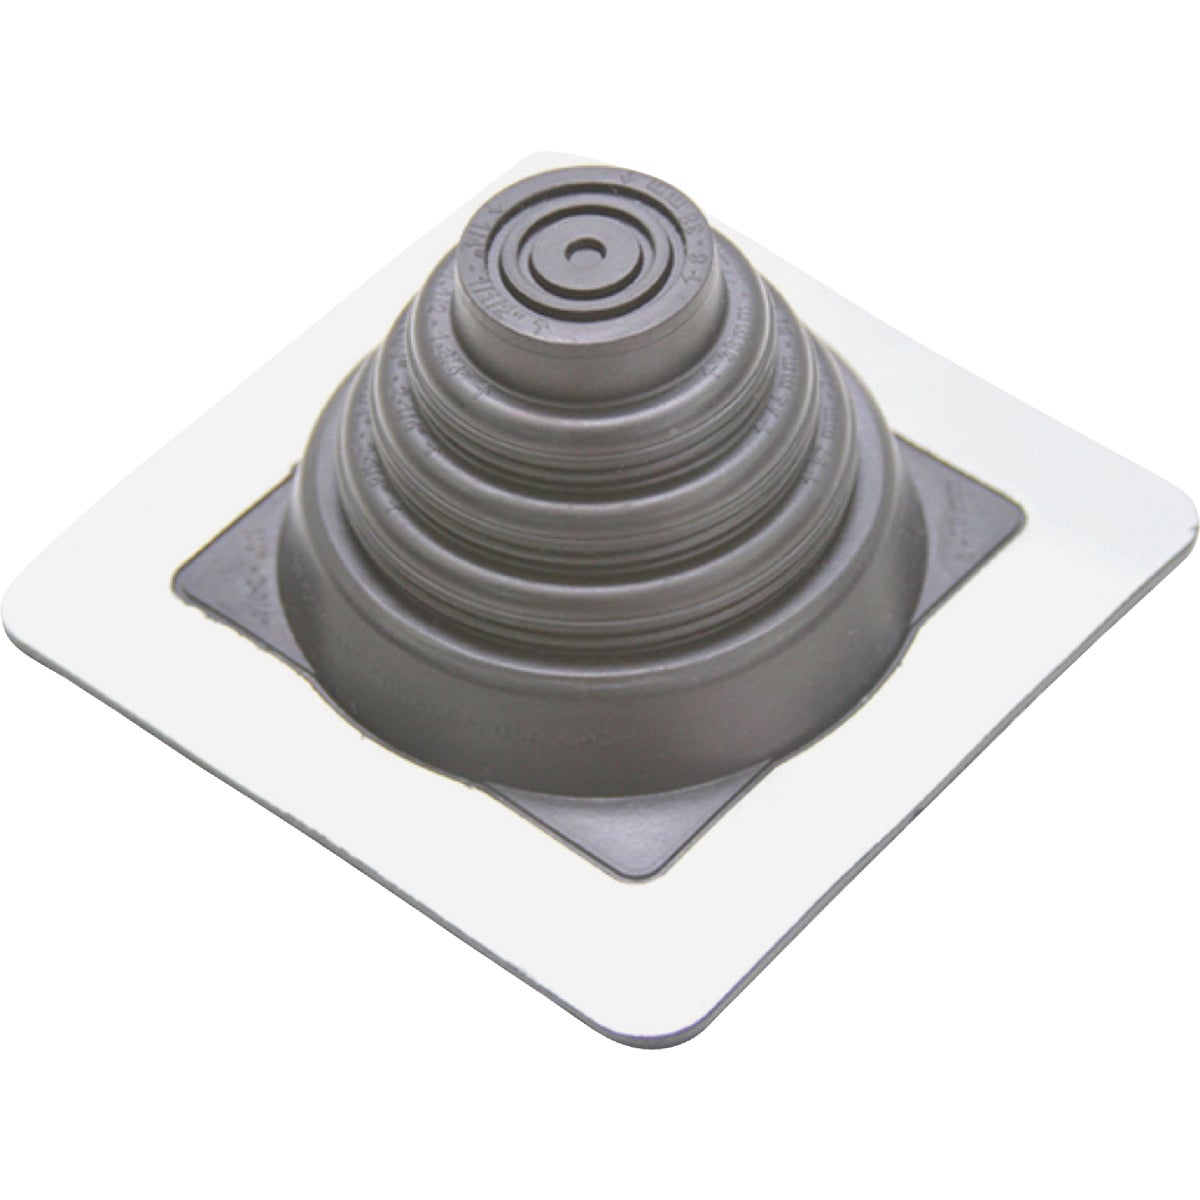 Item 456756, Oatey Master Flash Roof Flashings are designed for use with metal profiled 